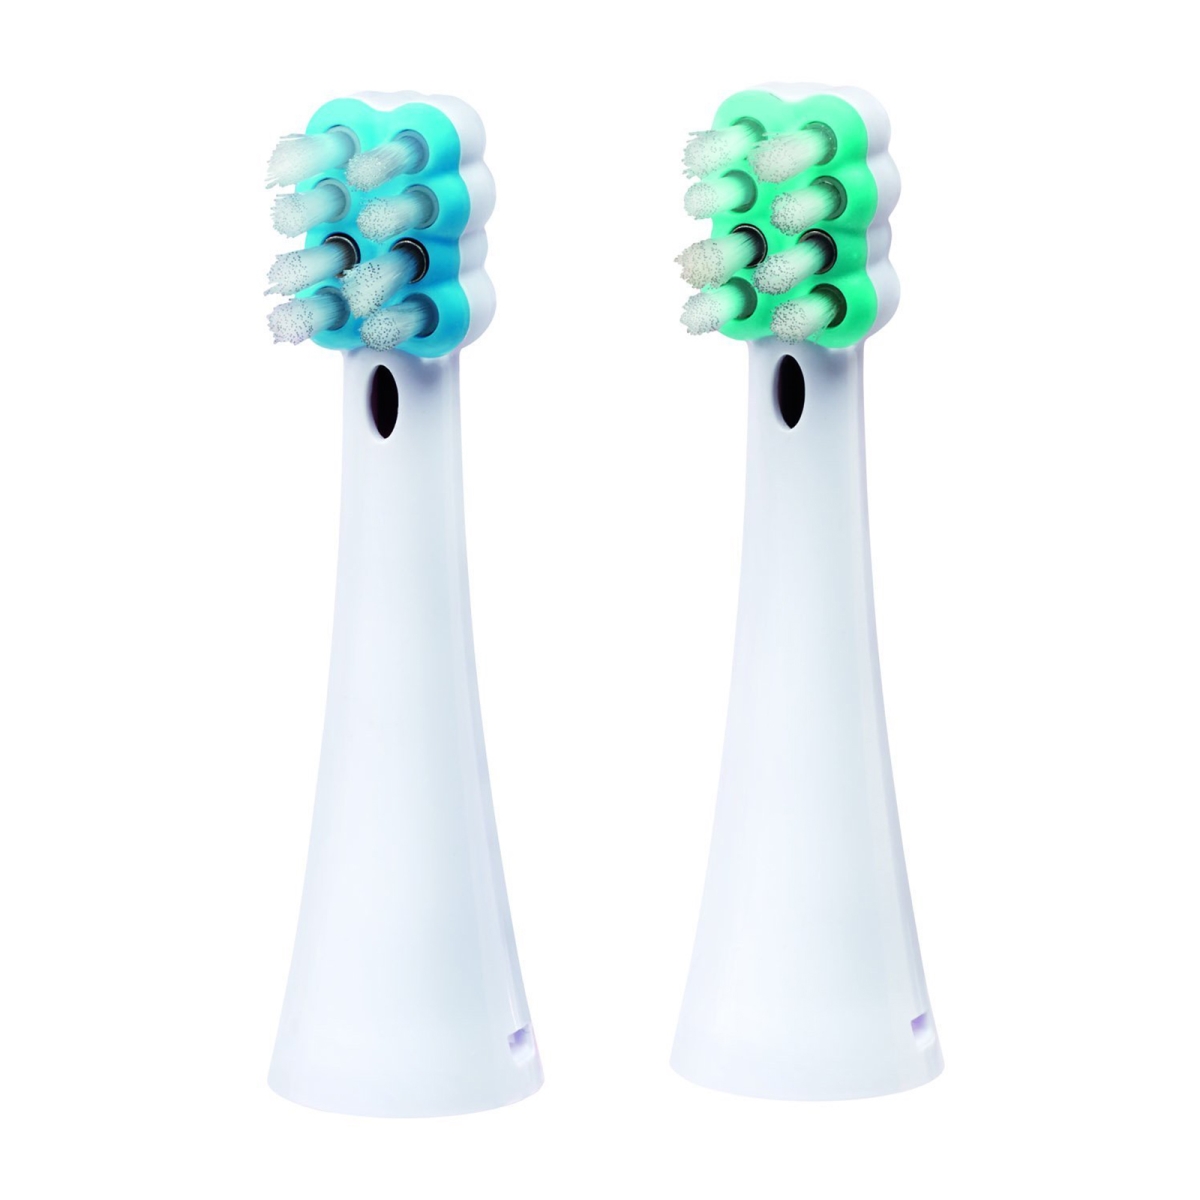 Nt11bc Nt11bc Interplak By Rechargeable Power Tooth Brush Replacement Brush Heads